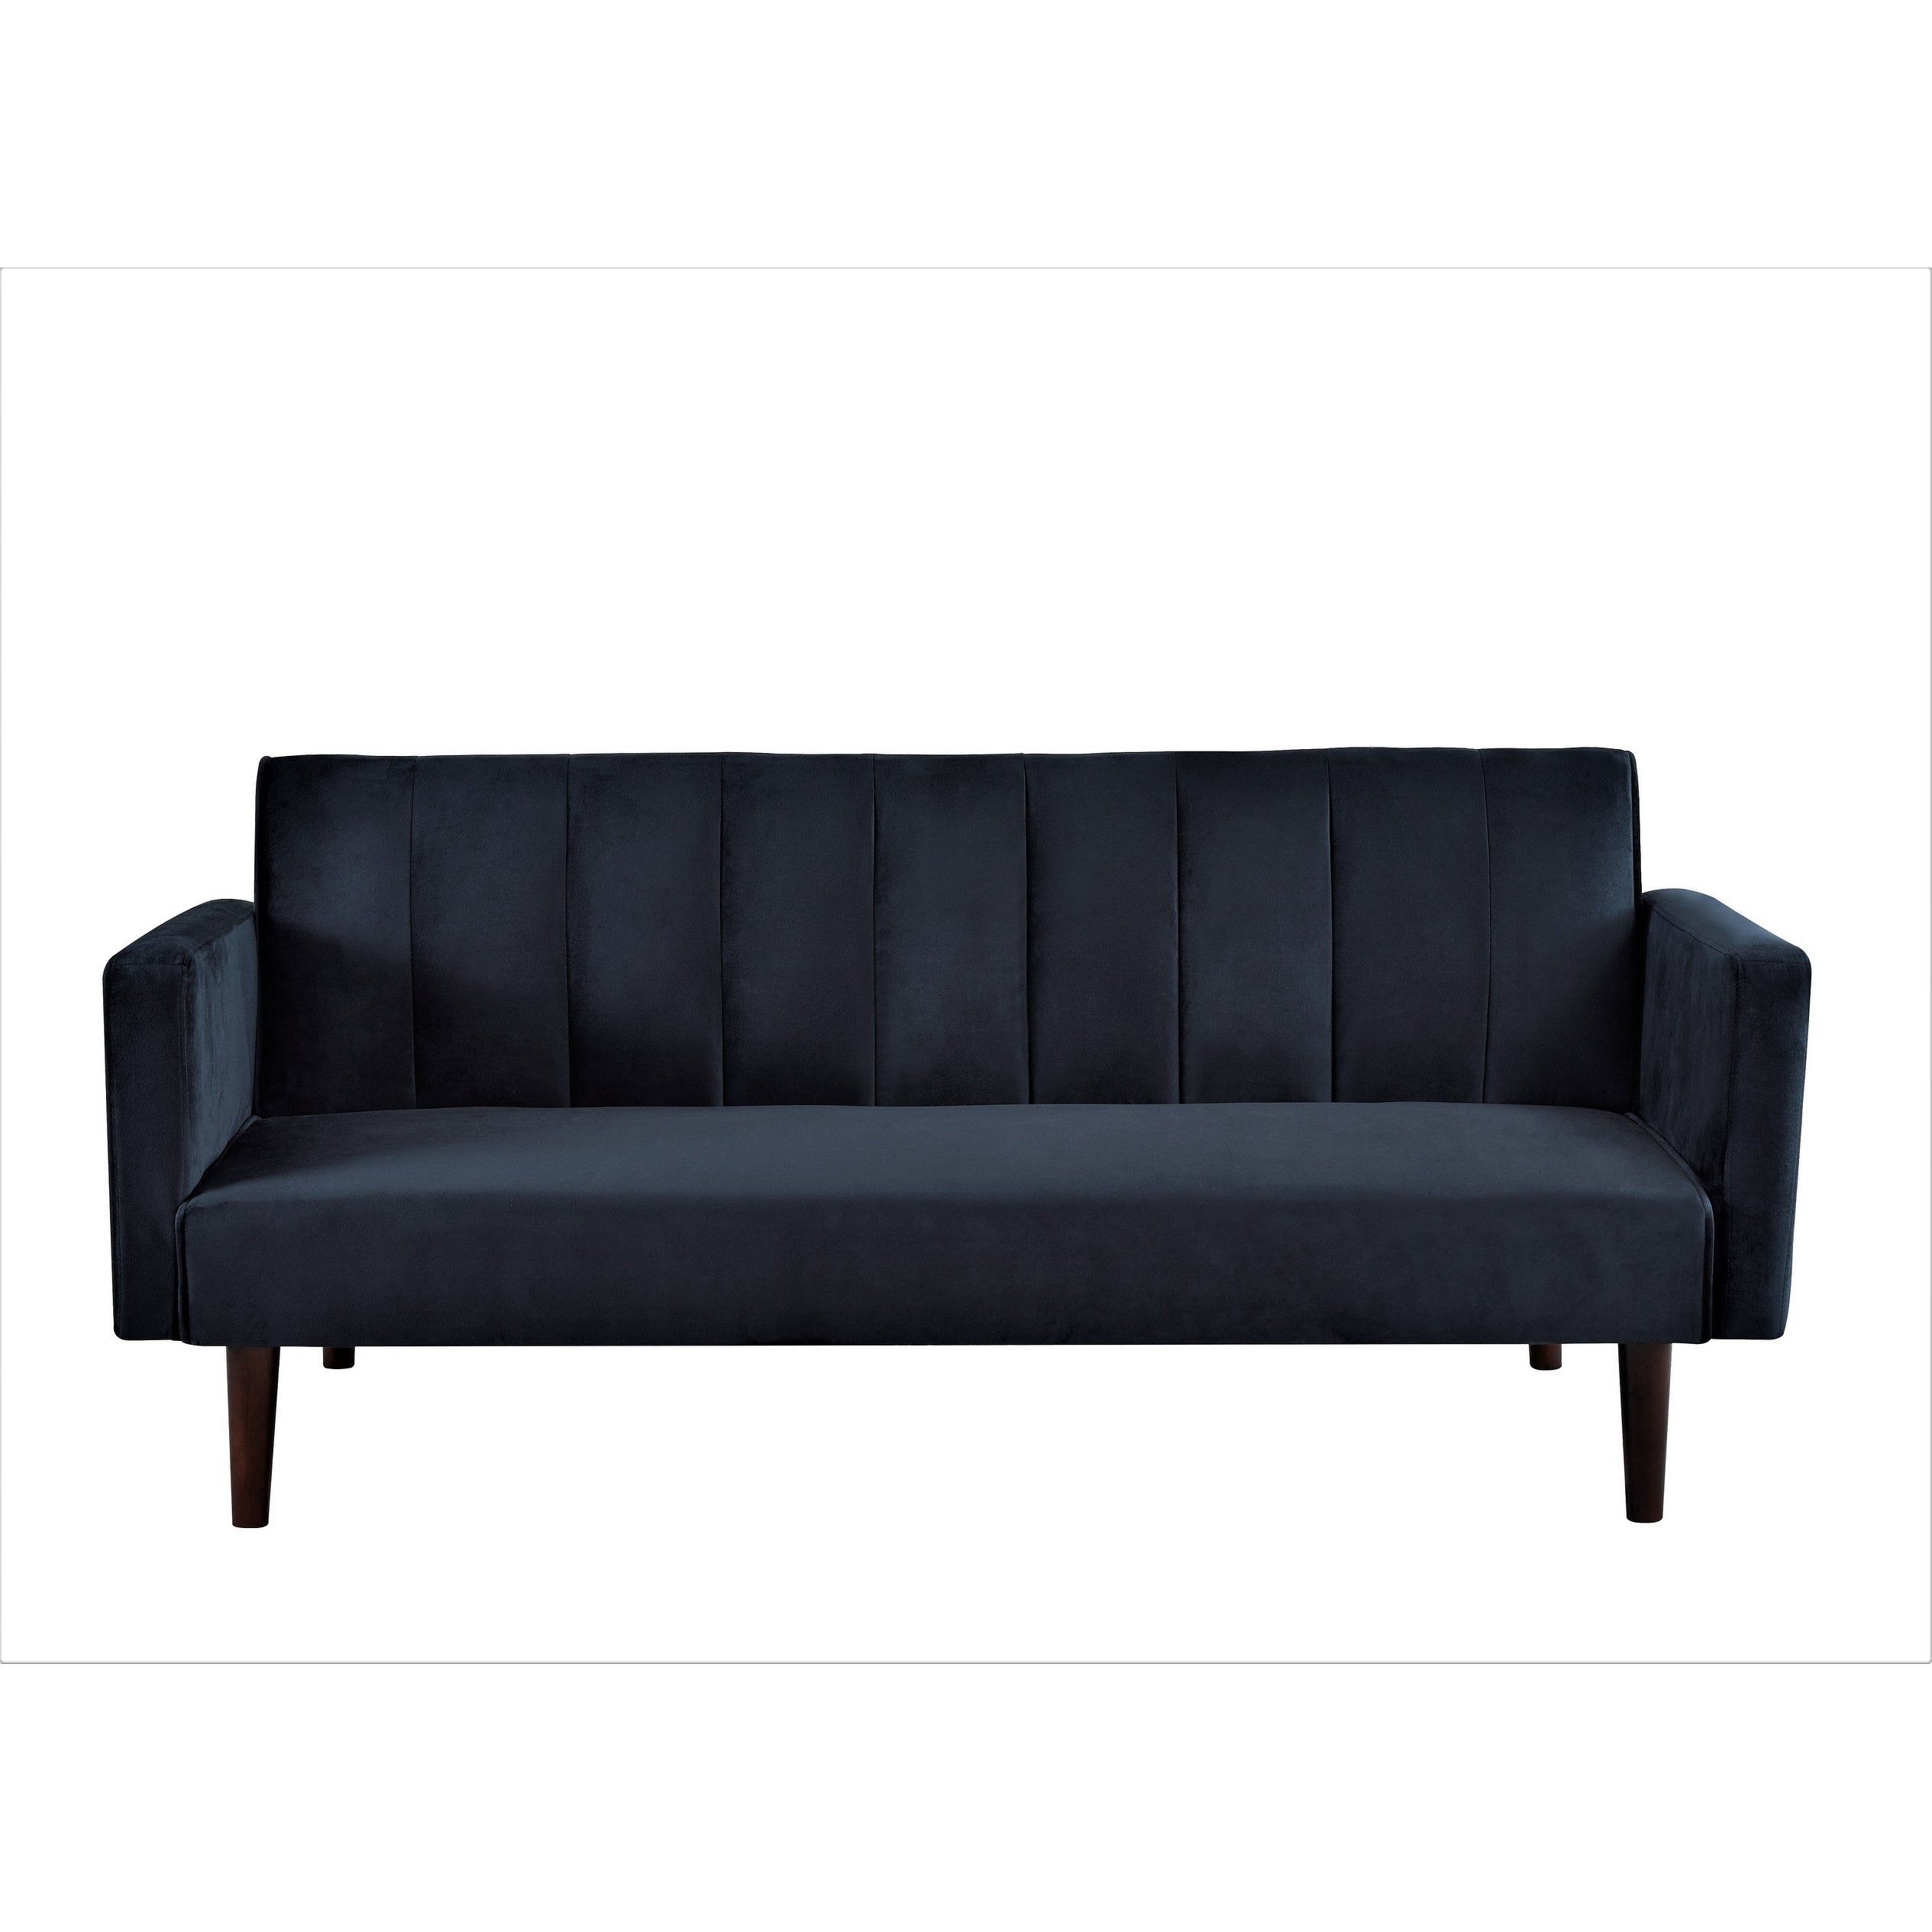 Our Best Living Room Furniture Deals | Velvet Sofa Bed, Sofa Bed With Regard To 66" Convertible Velvet Sofa Beds (Gallery 17 of 20)